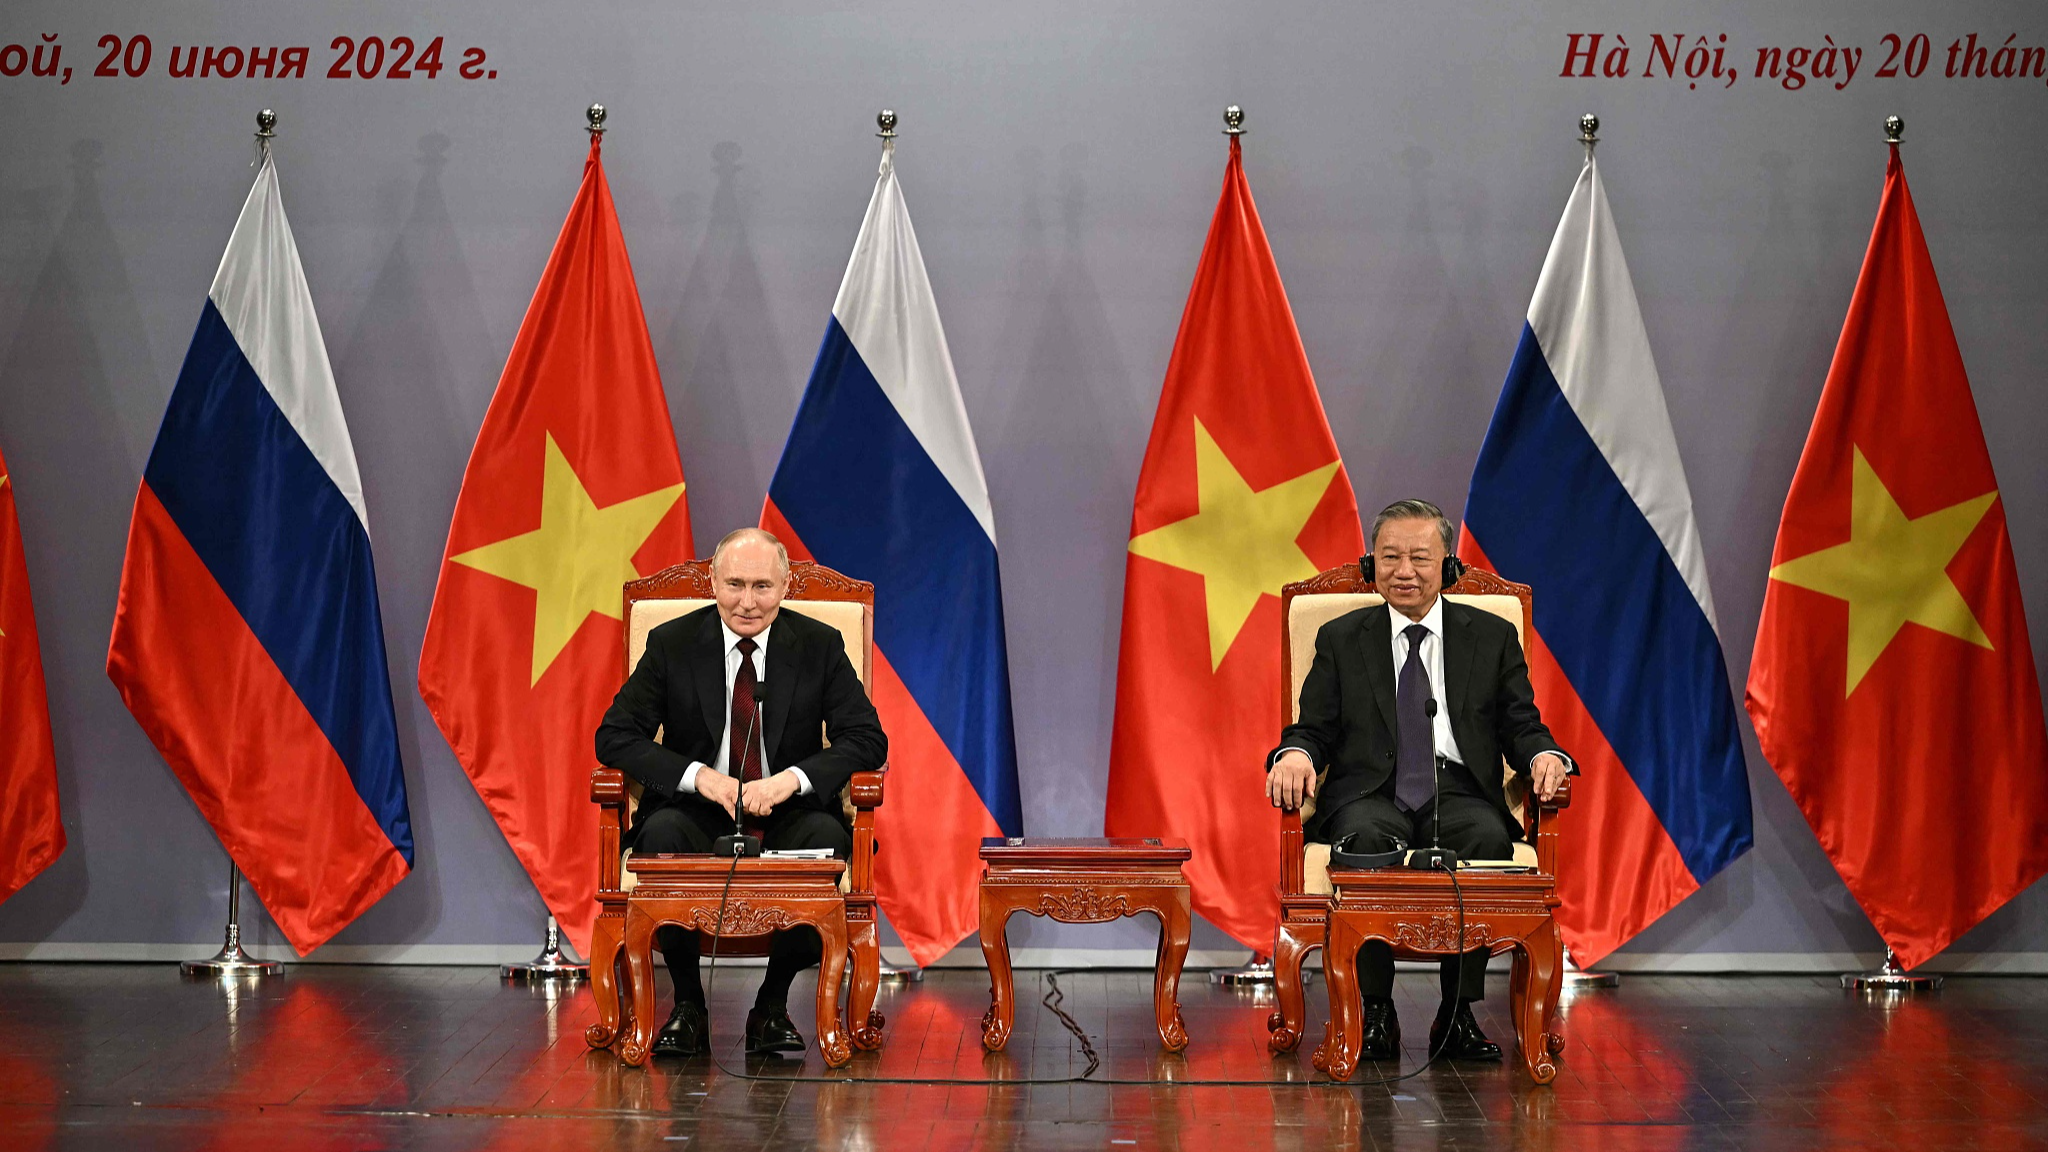 Russia's President Vladimir Putin (L) and Vietnam's President To Lam (R) take part in an event attended by the Vietnam Friendship Association and generations of Vietnamese alumni that studied in Russia at the Hanoi Opera House in Hanoi on June 20, 2024. /CFP